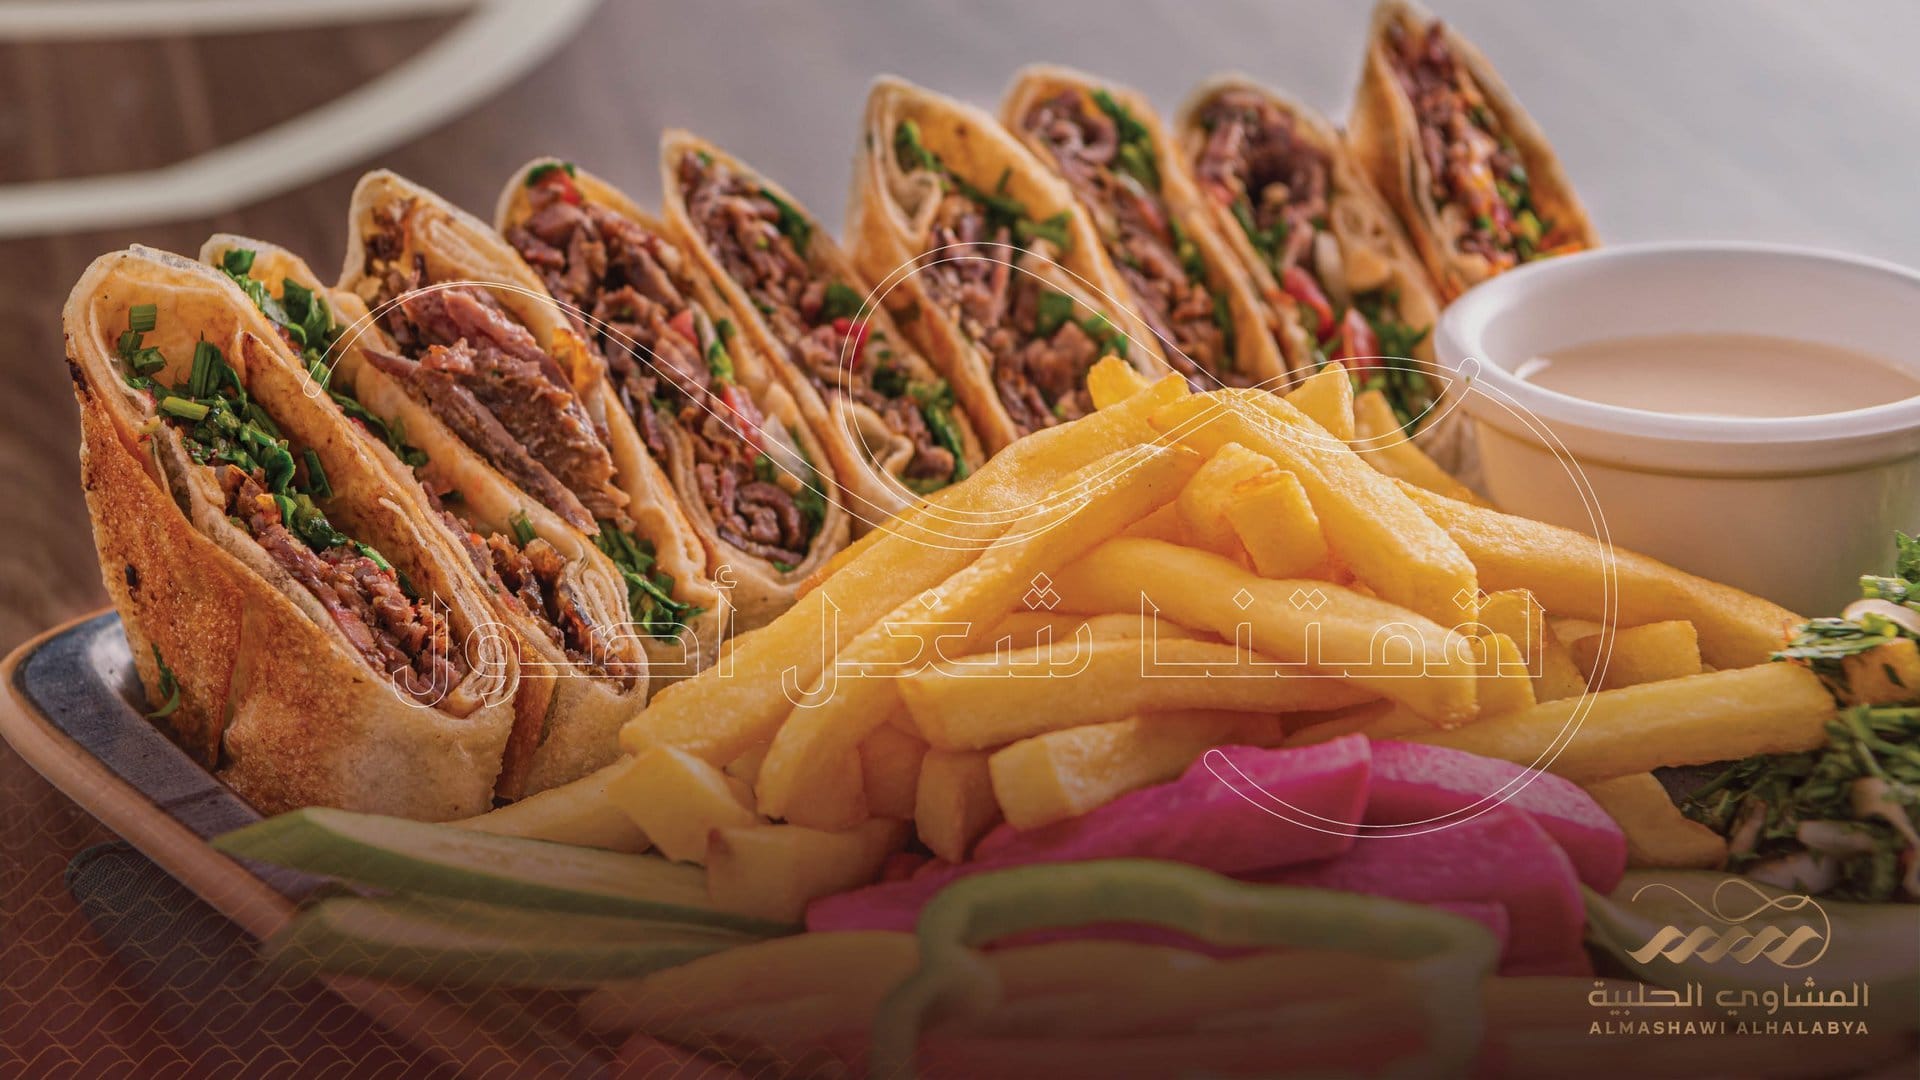 Spice Up Your Food Routine with a Tasty Surprise: The Best Appetizing Shawarma in Sharjah